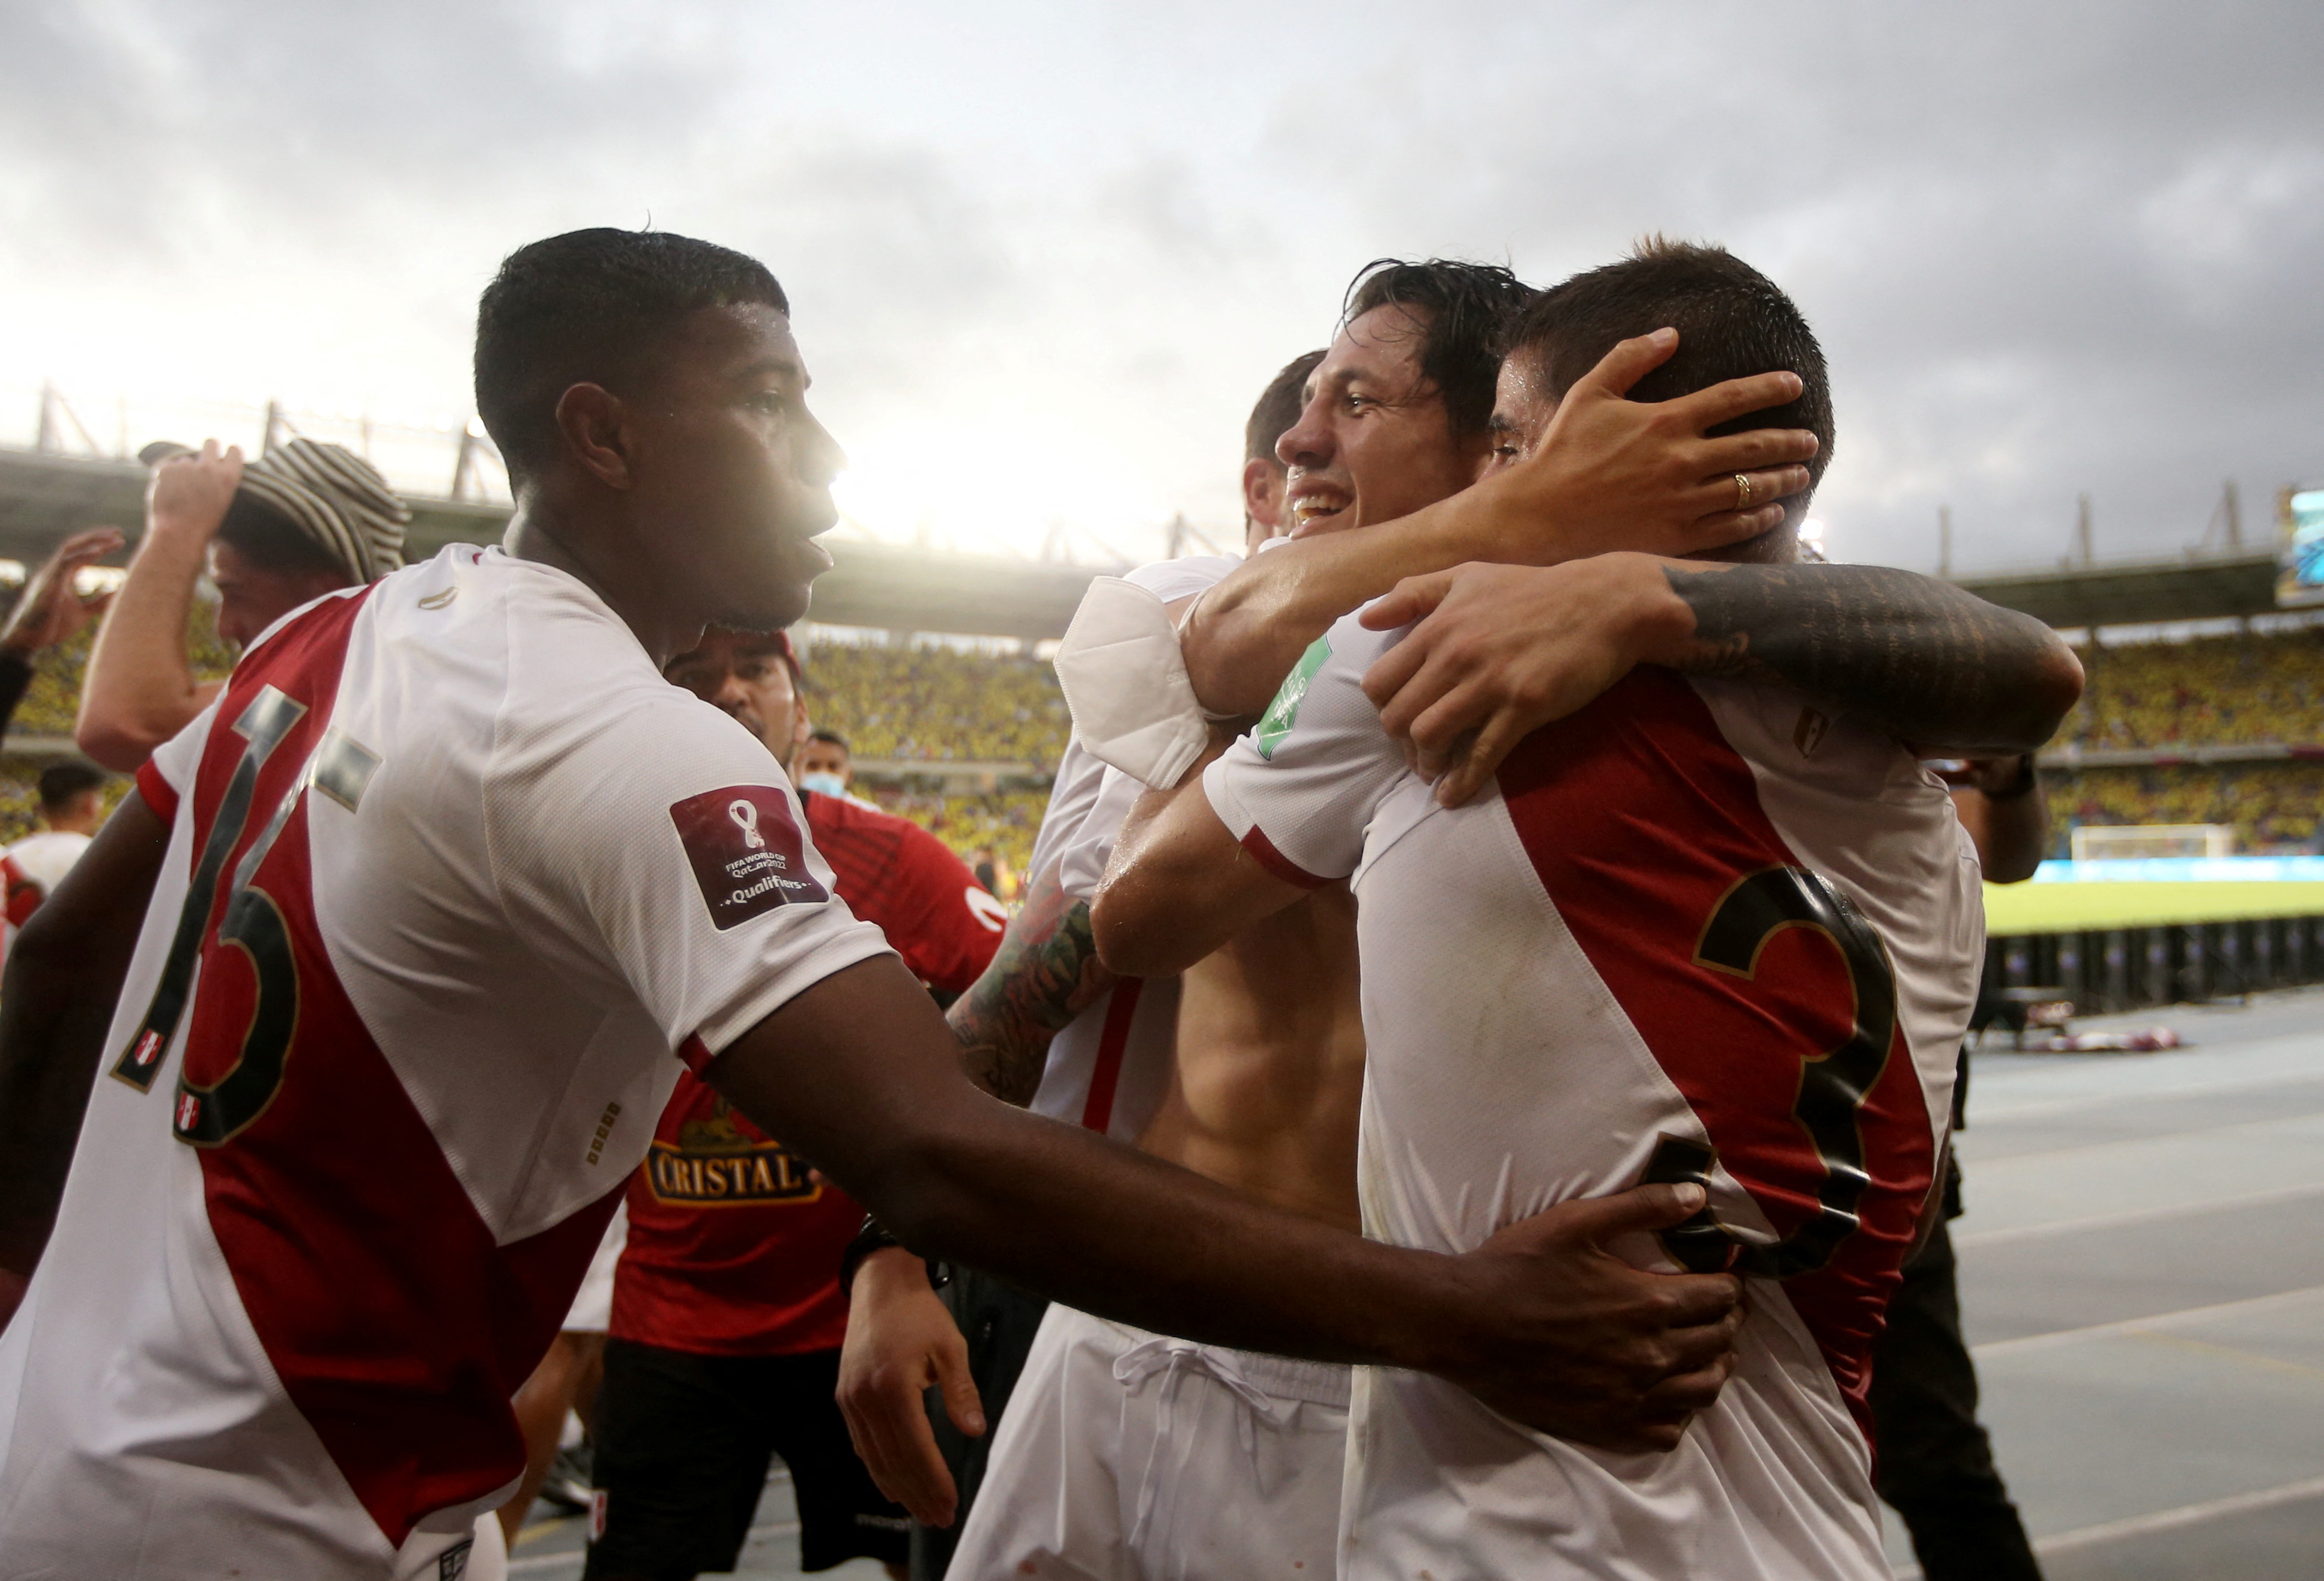 Peru depends on itself to qualify for the 2022 Qatar World Cup (REUTERS / Luisa Gonzalez)